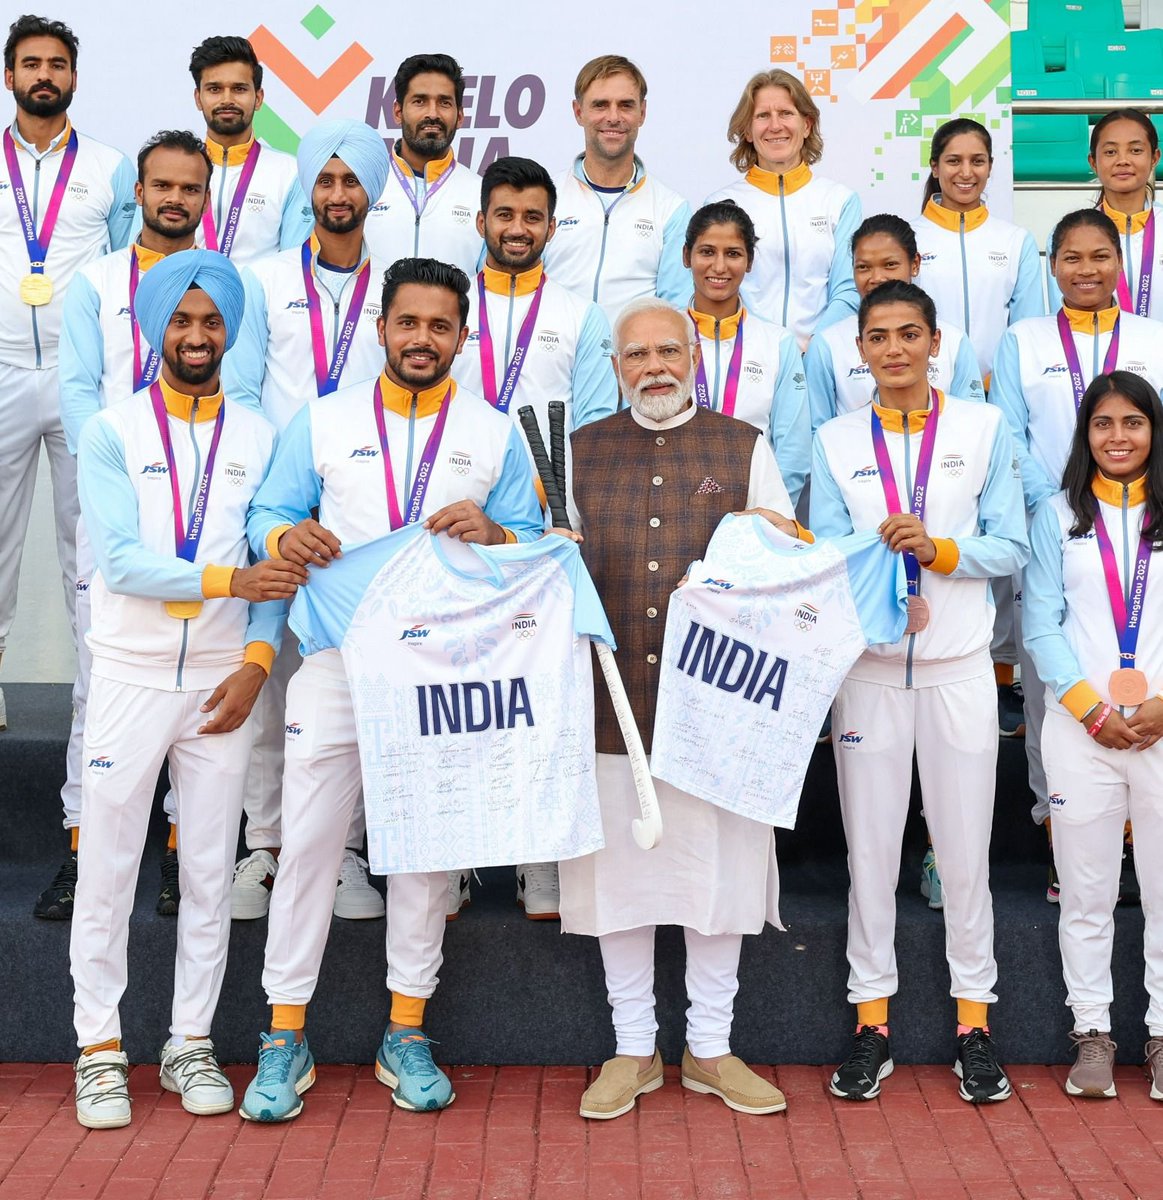 Glimpses from the very special meeting with our Asian Games contingent, their coaches and support staff. The unwavering spirit, dedication and the countless hours of hard work of every athlete is inspiring. The accomplishments of our athletes have not just added to India's